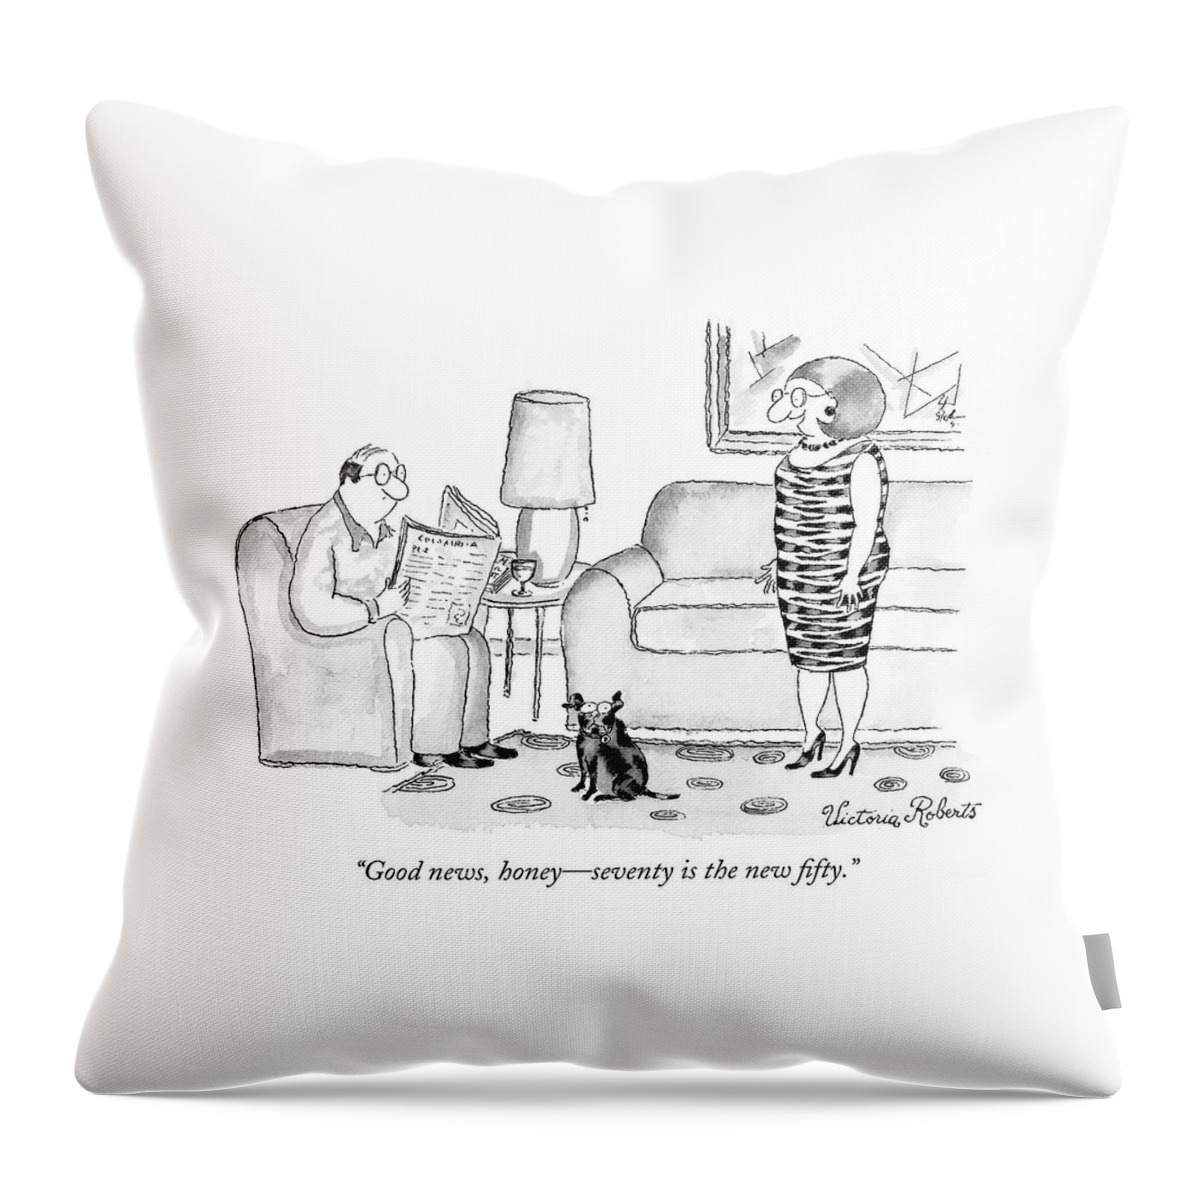 Good News, Honey - Seventy Is The New Fifty Throw Pillow